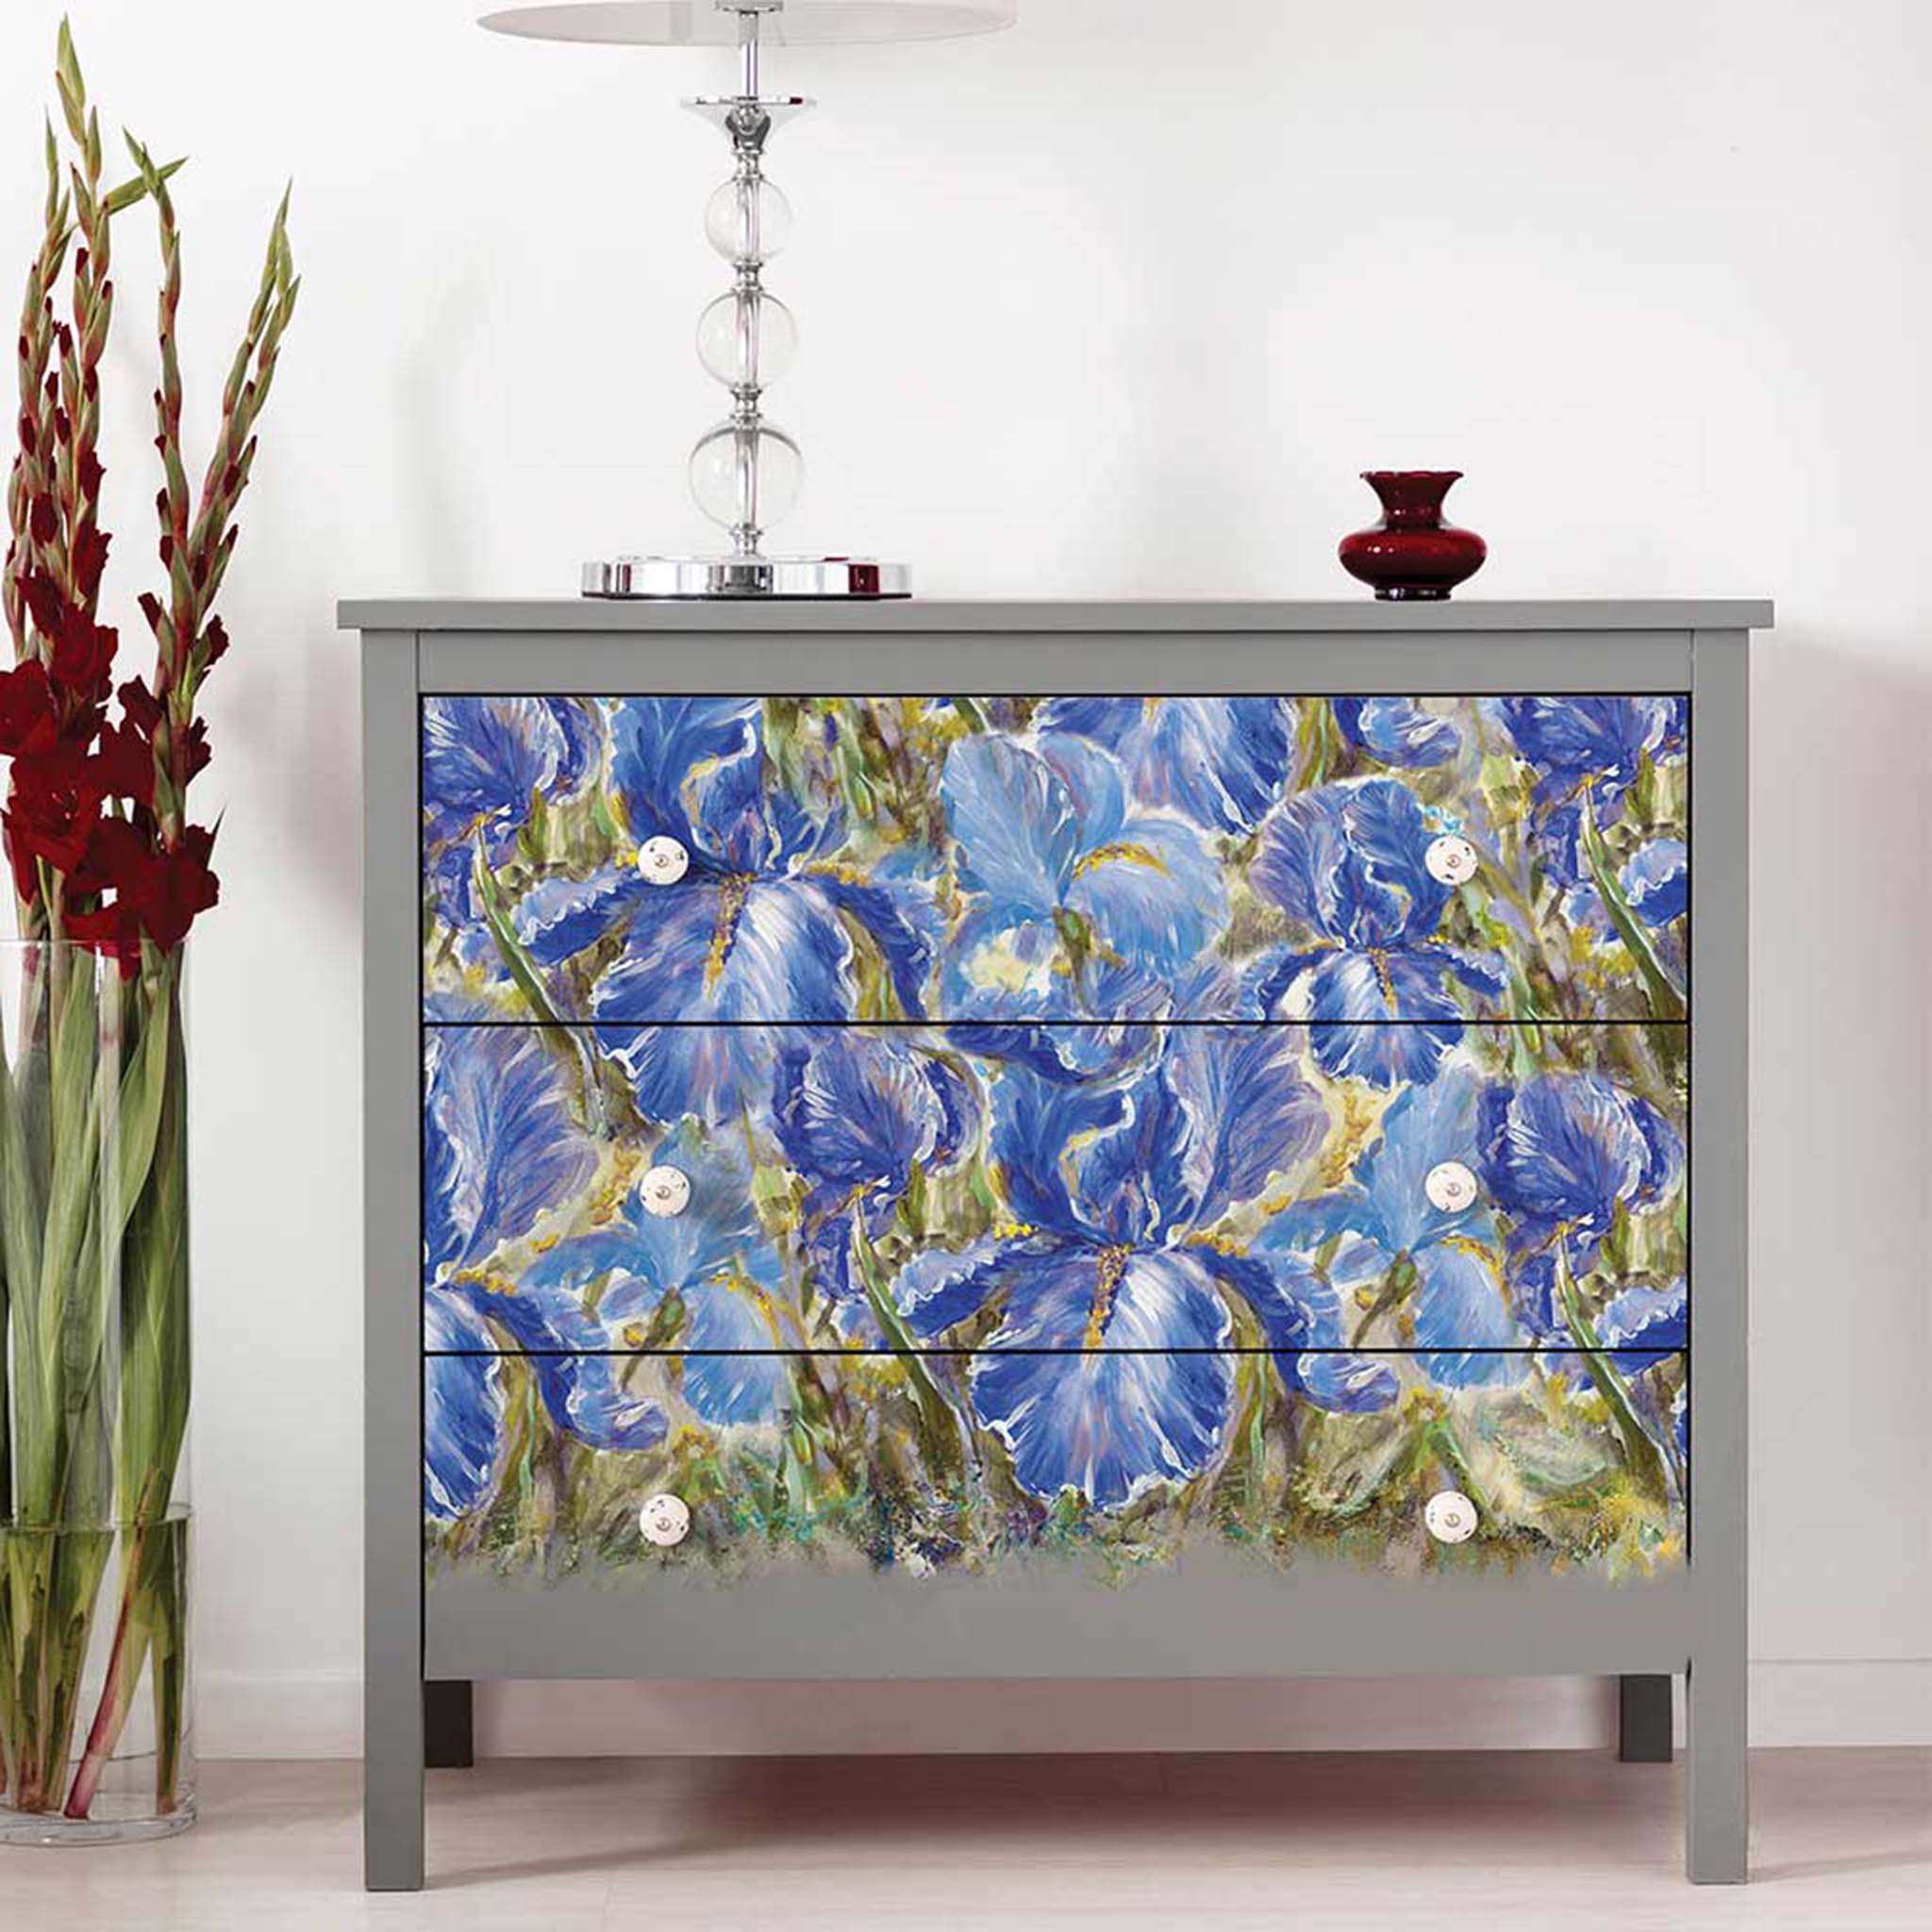 A 3-drawer dresser is painted light grey and features the Enchanted Iris A1 fiber paper on it.